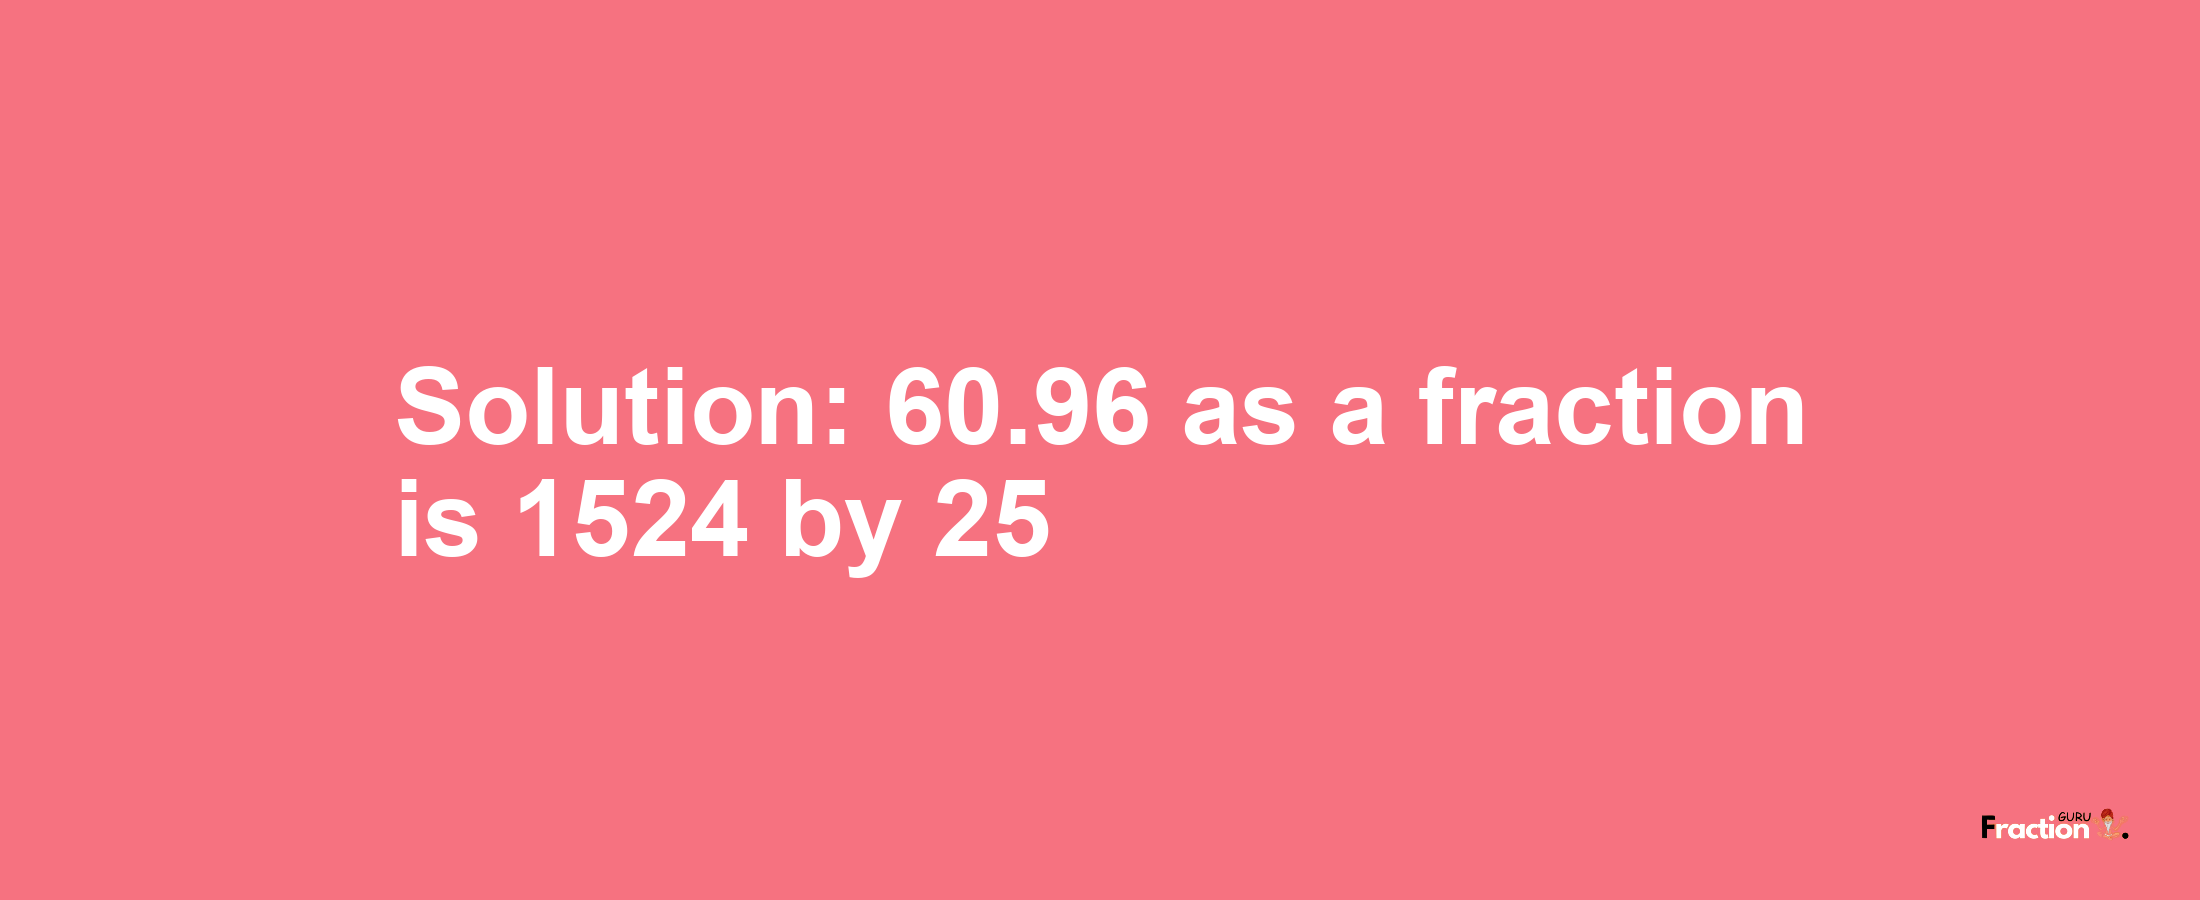 Solution:60.96 as a fraction is 1524/25